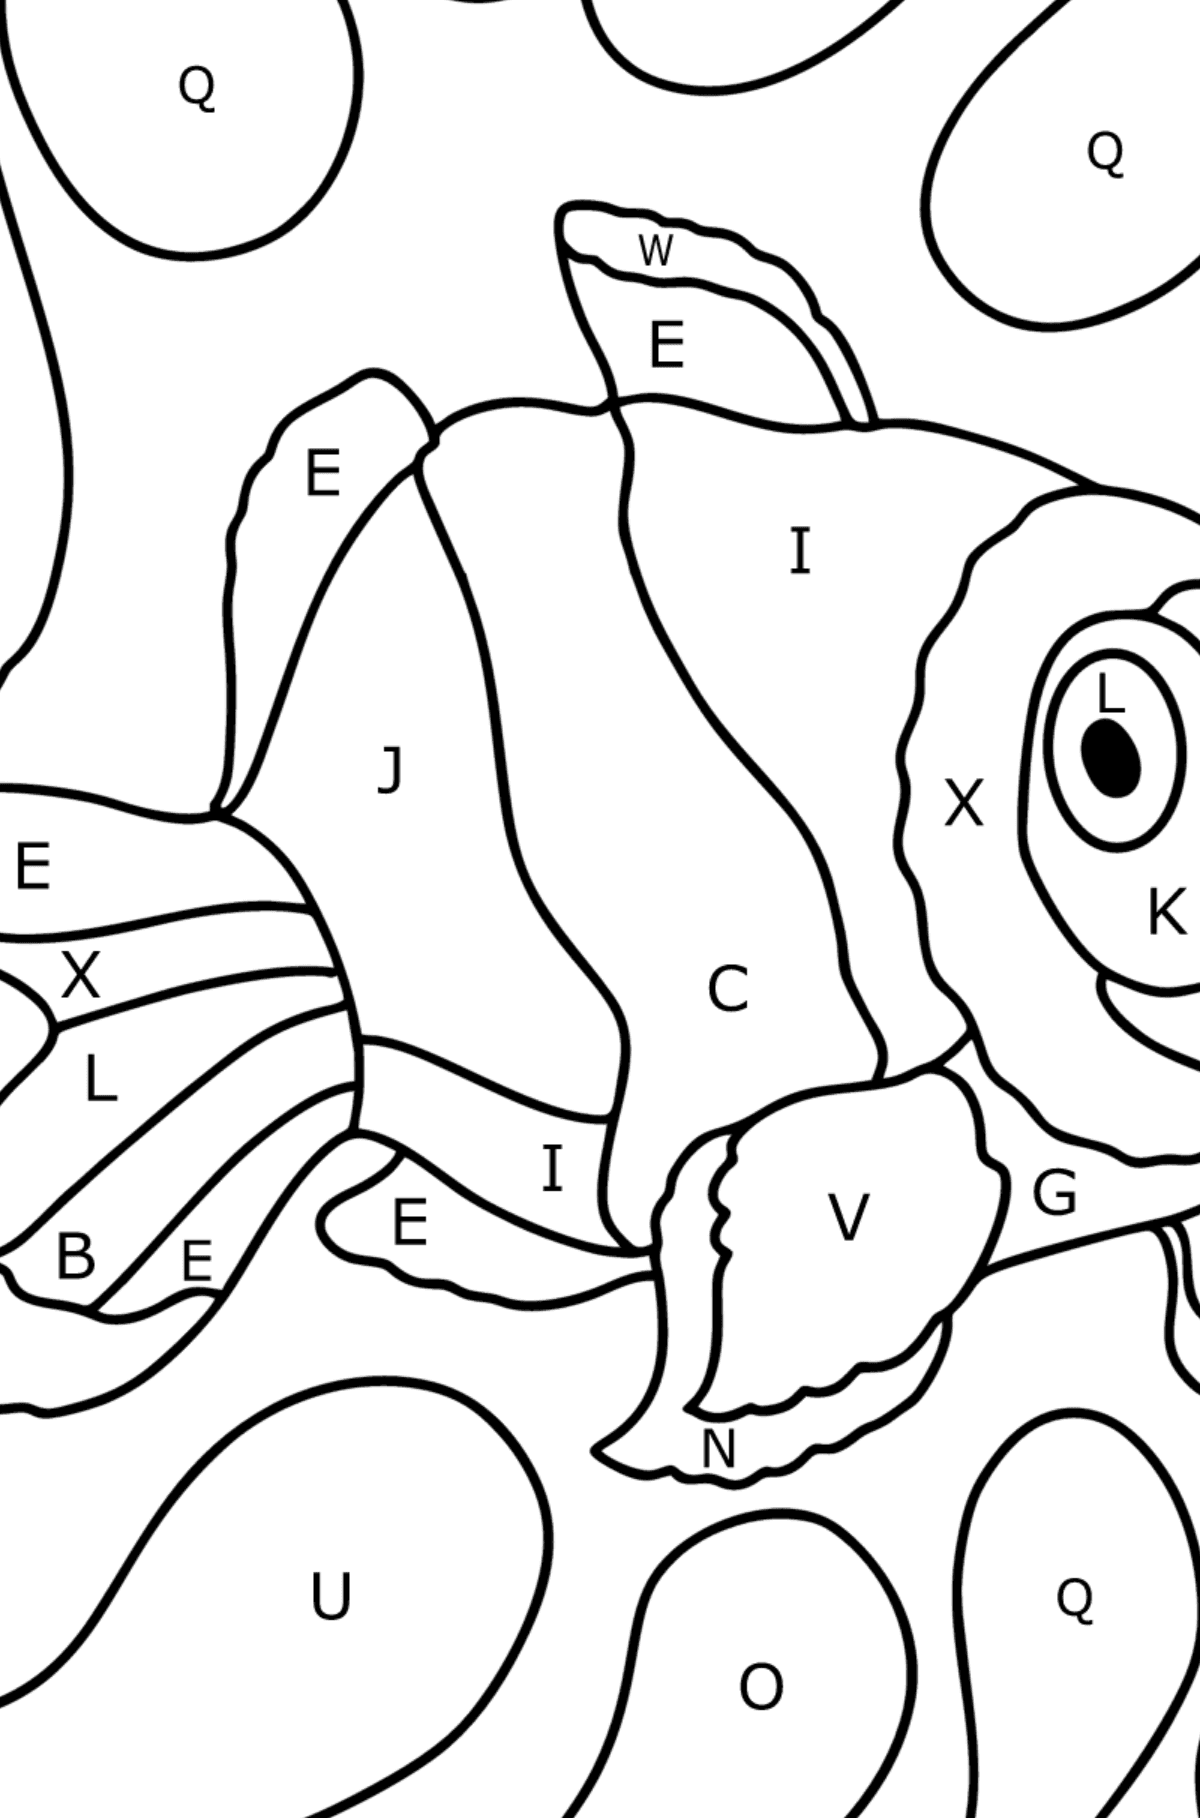 Clown fish coloring page - Coloring by Letters for Kids